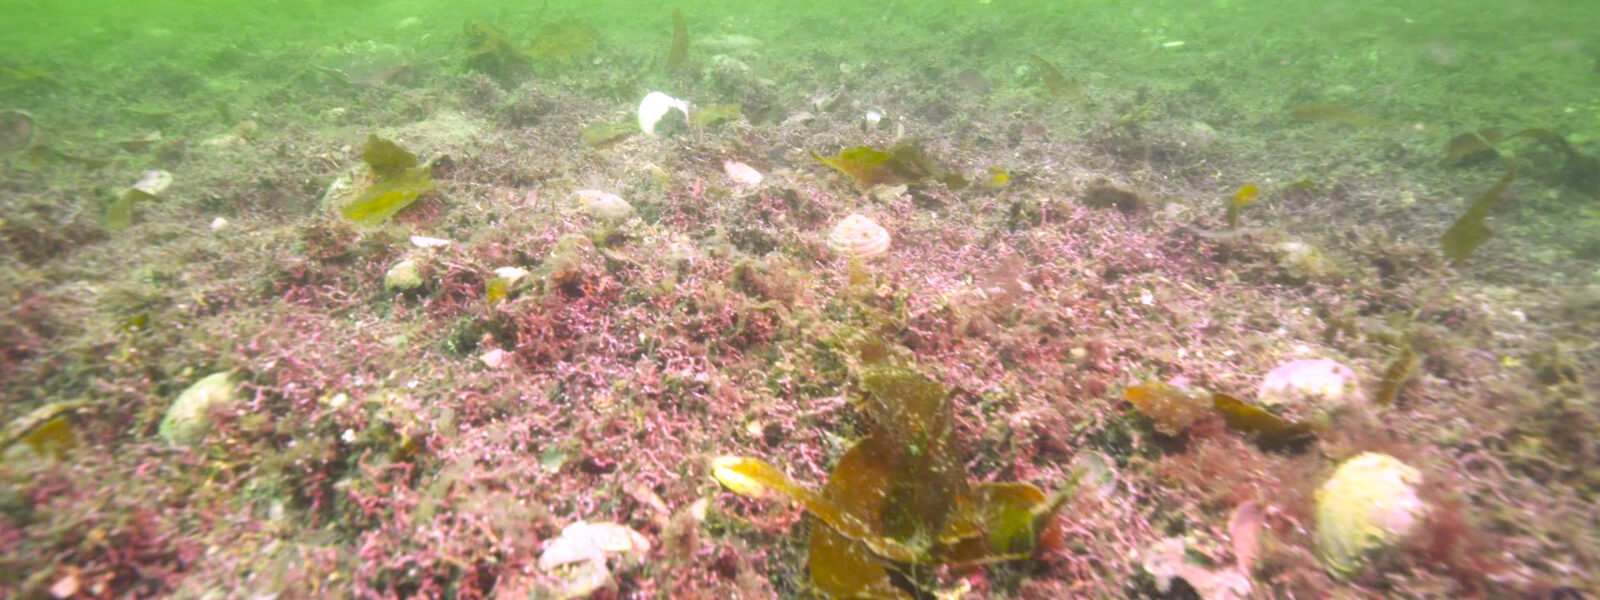 Help Us Save the Recovery of our ‘Maerl’ Marine Protected Area from Fish Farm Expansions